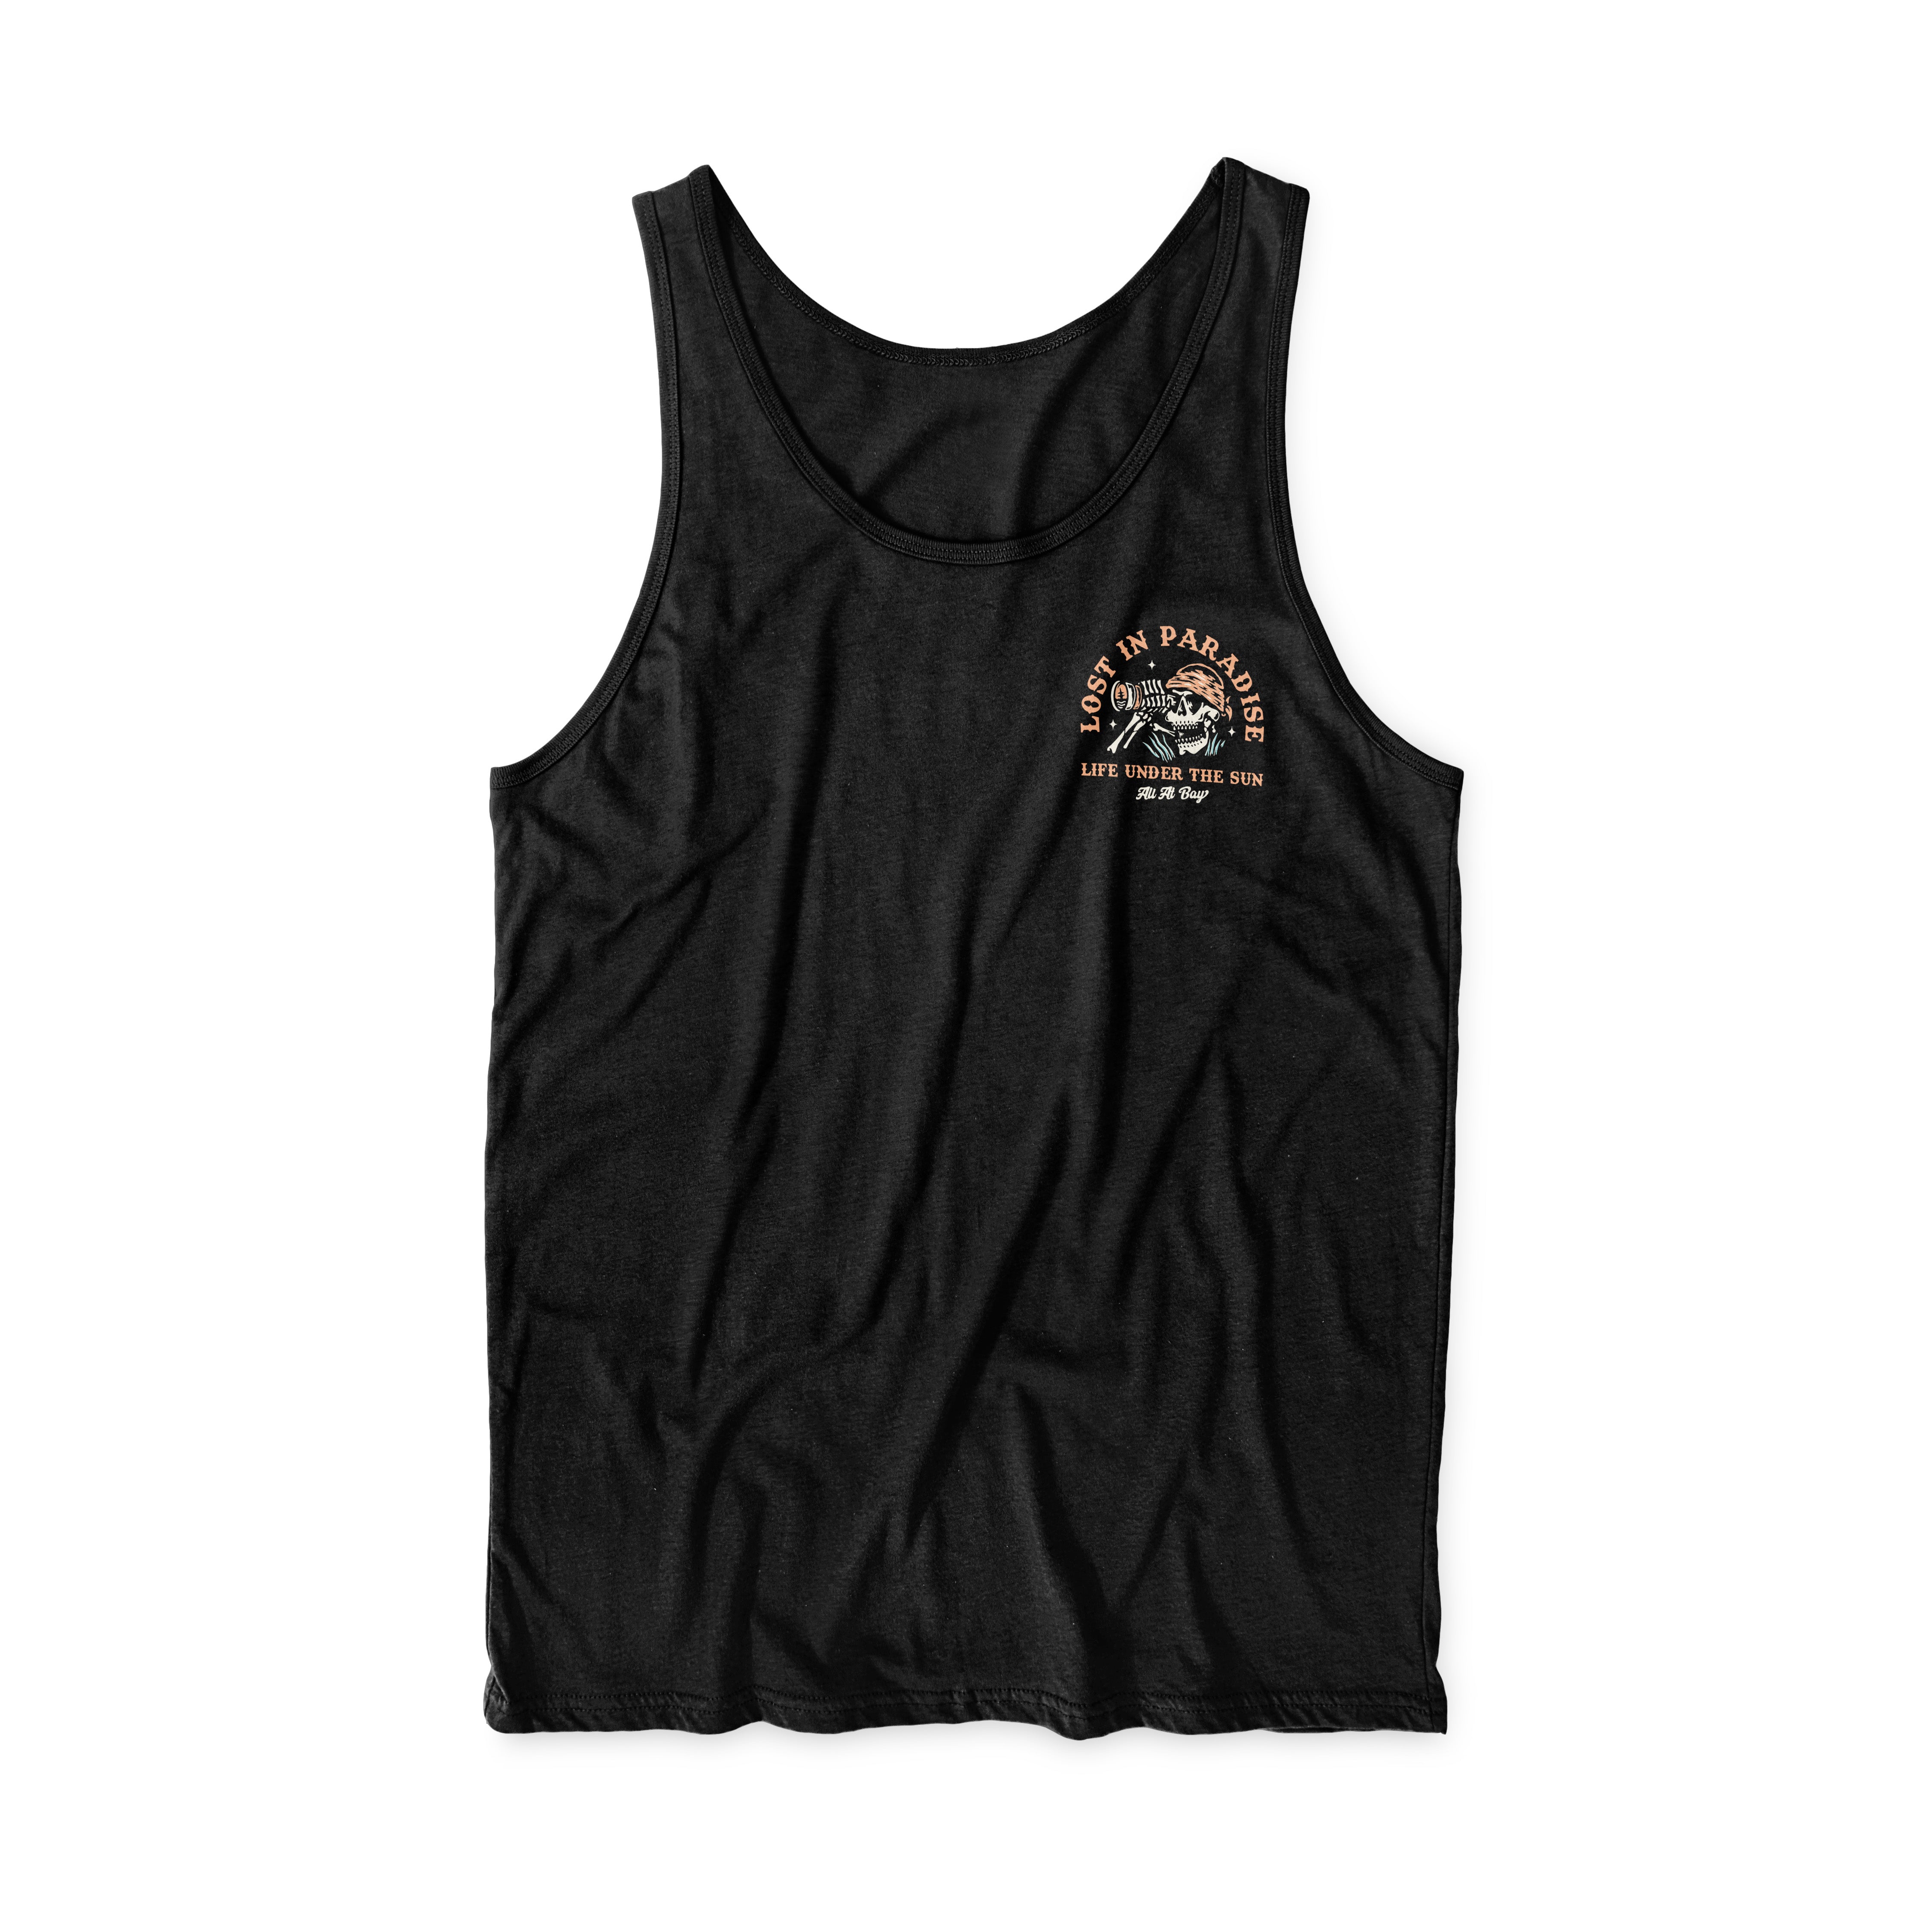 Lost in paradise tank top